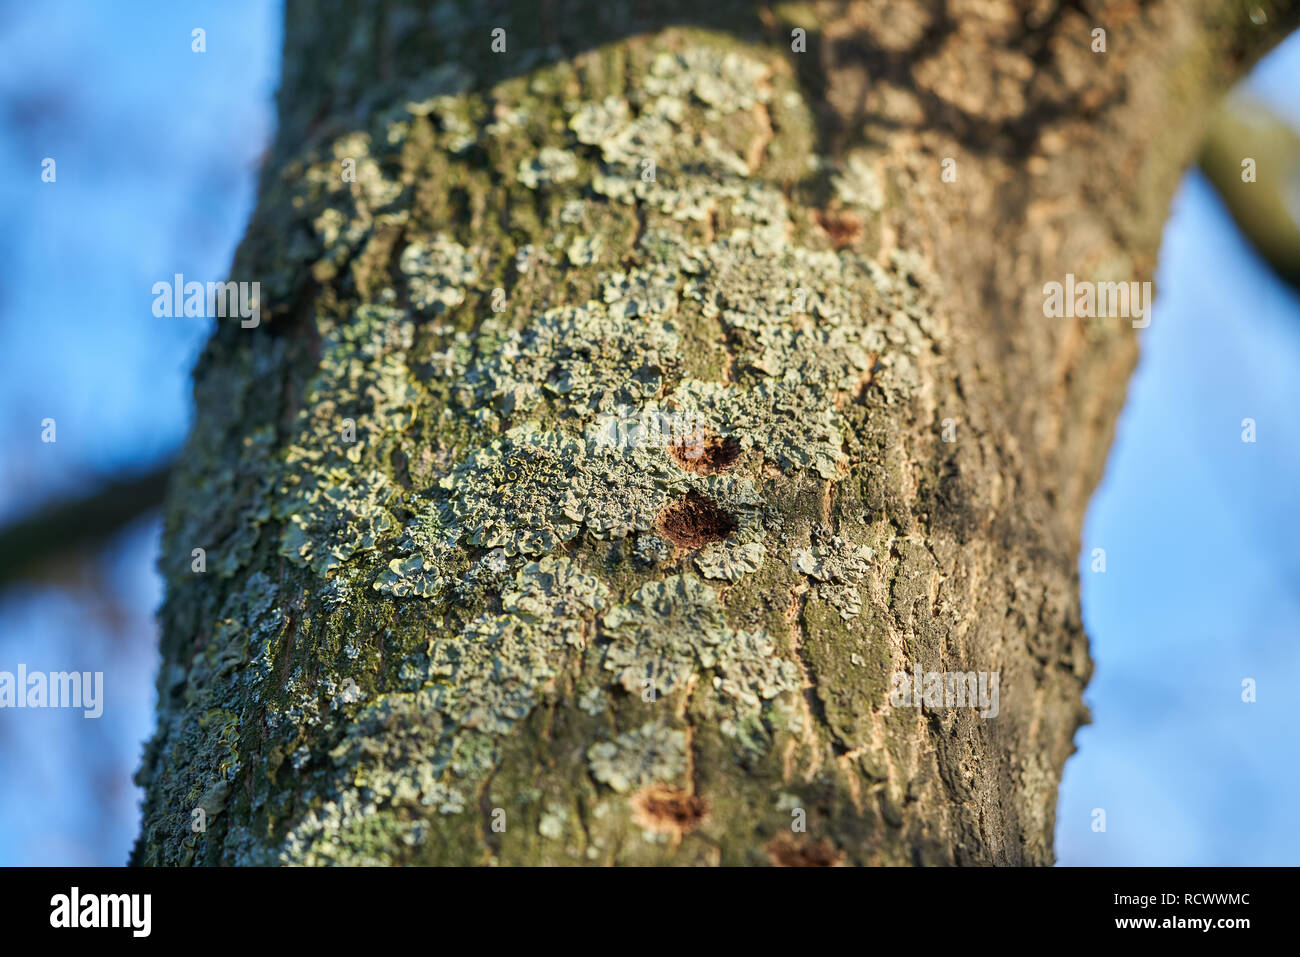 A tree infested by the Asian longhorn beetle in Magdeburg in Germany. The beetle is spreading around since 2000 in Europe, and damaged deciduous trees Stock Photo